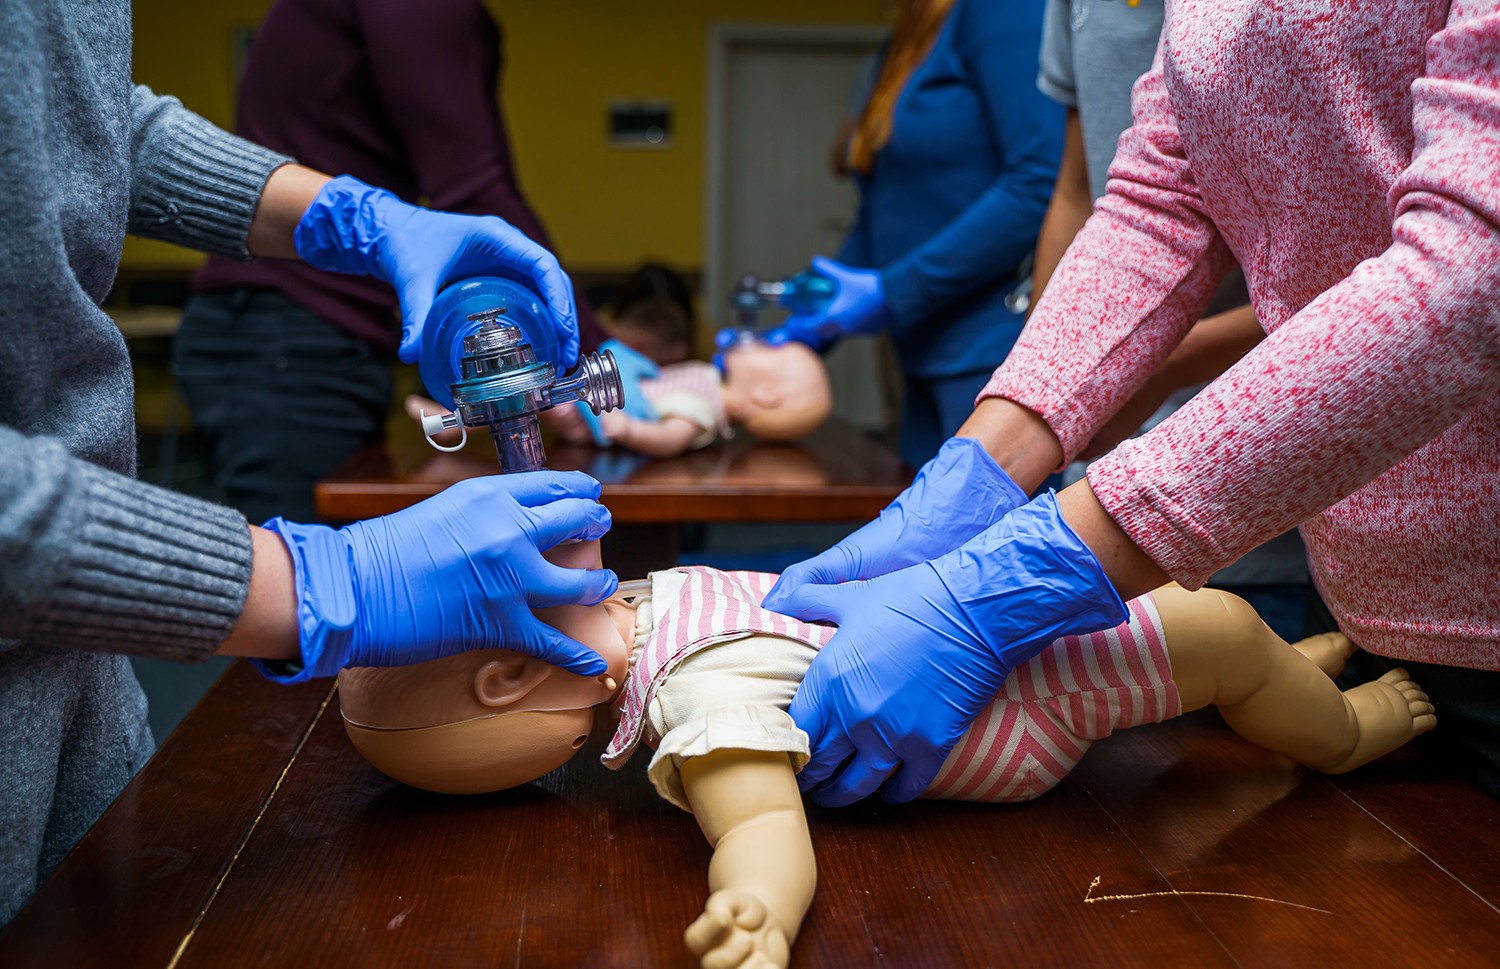 Adult and paediatric basic life support